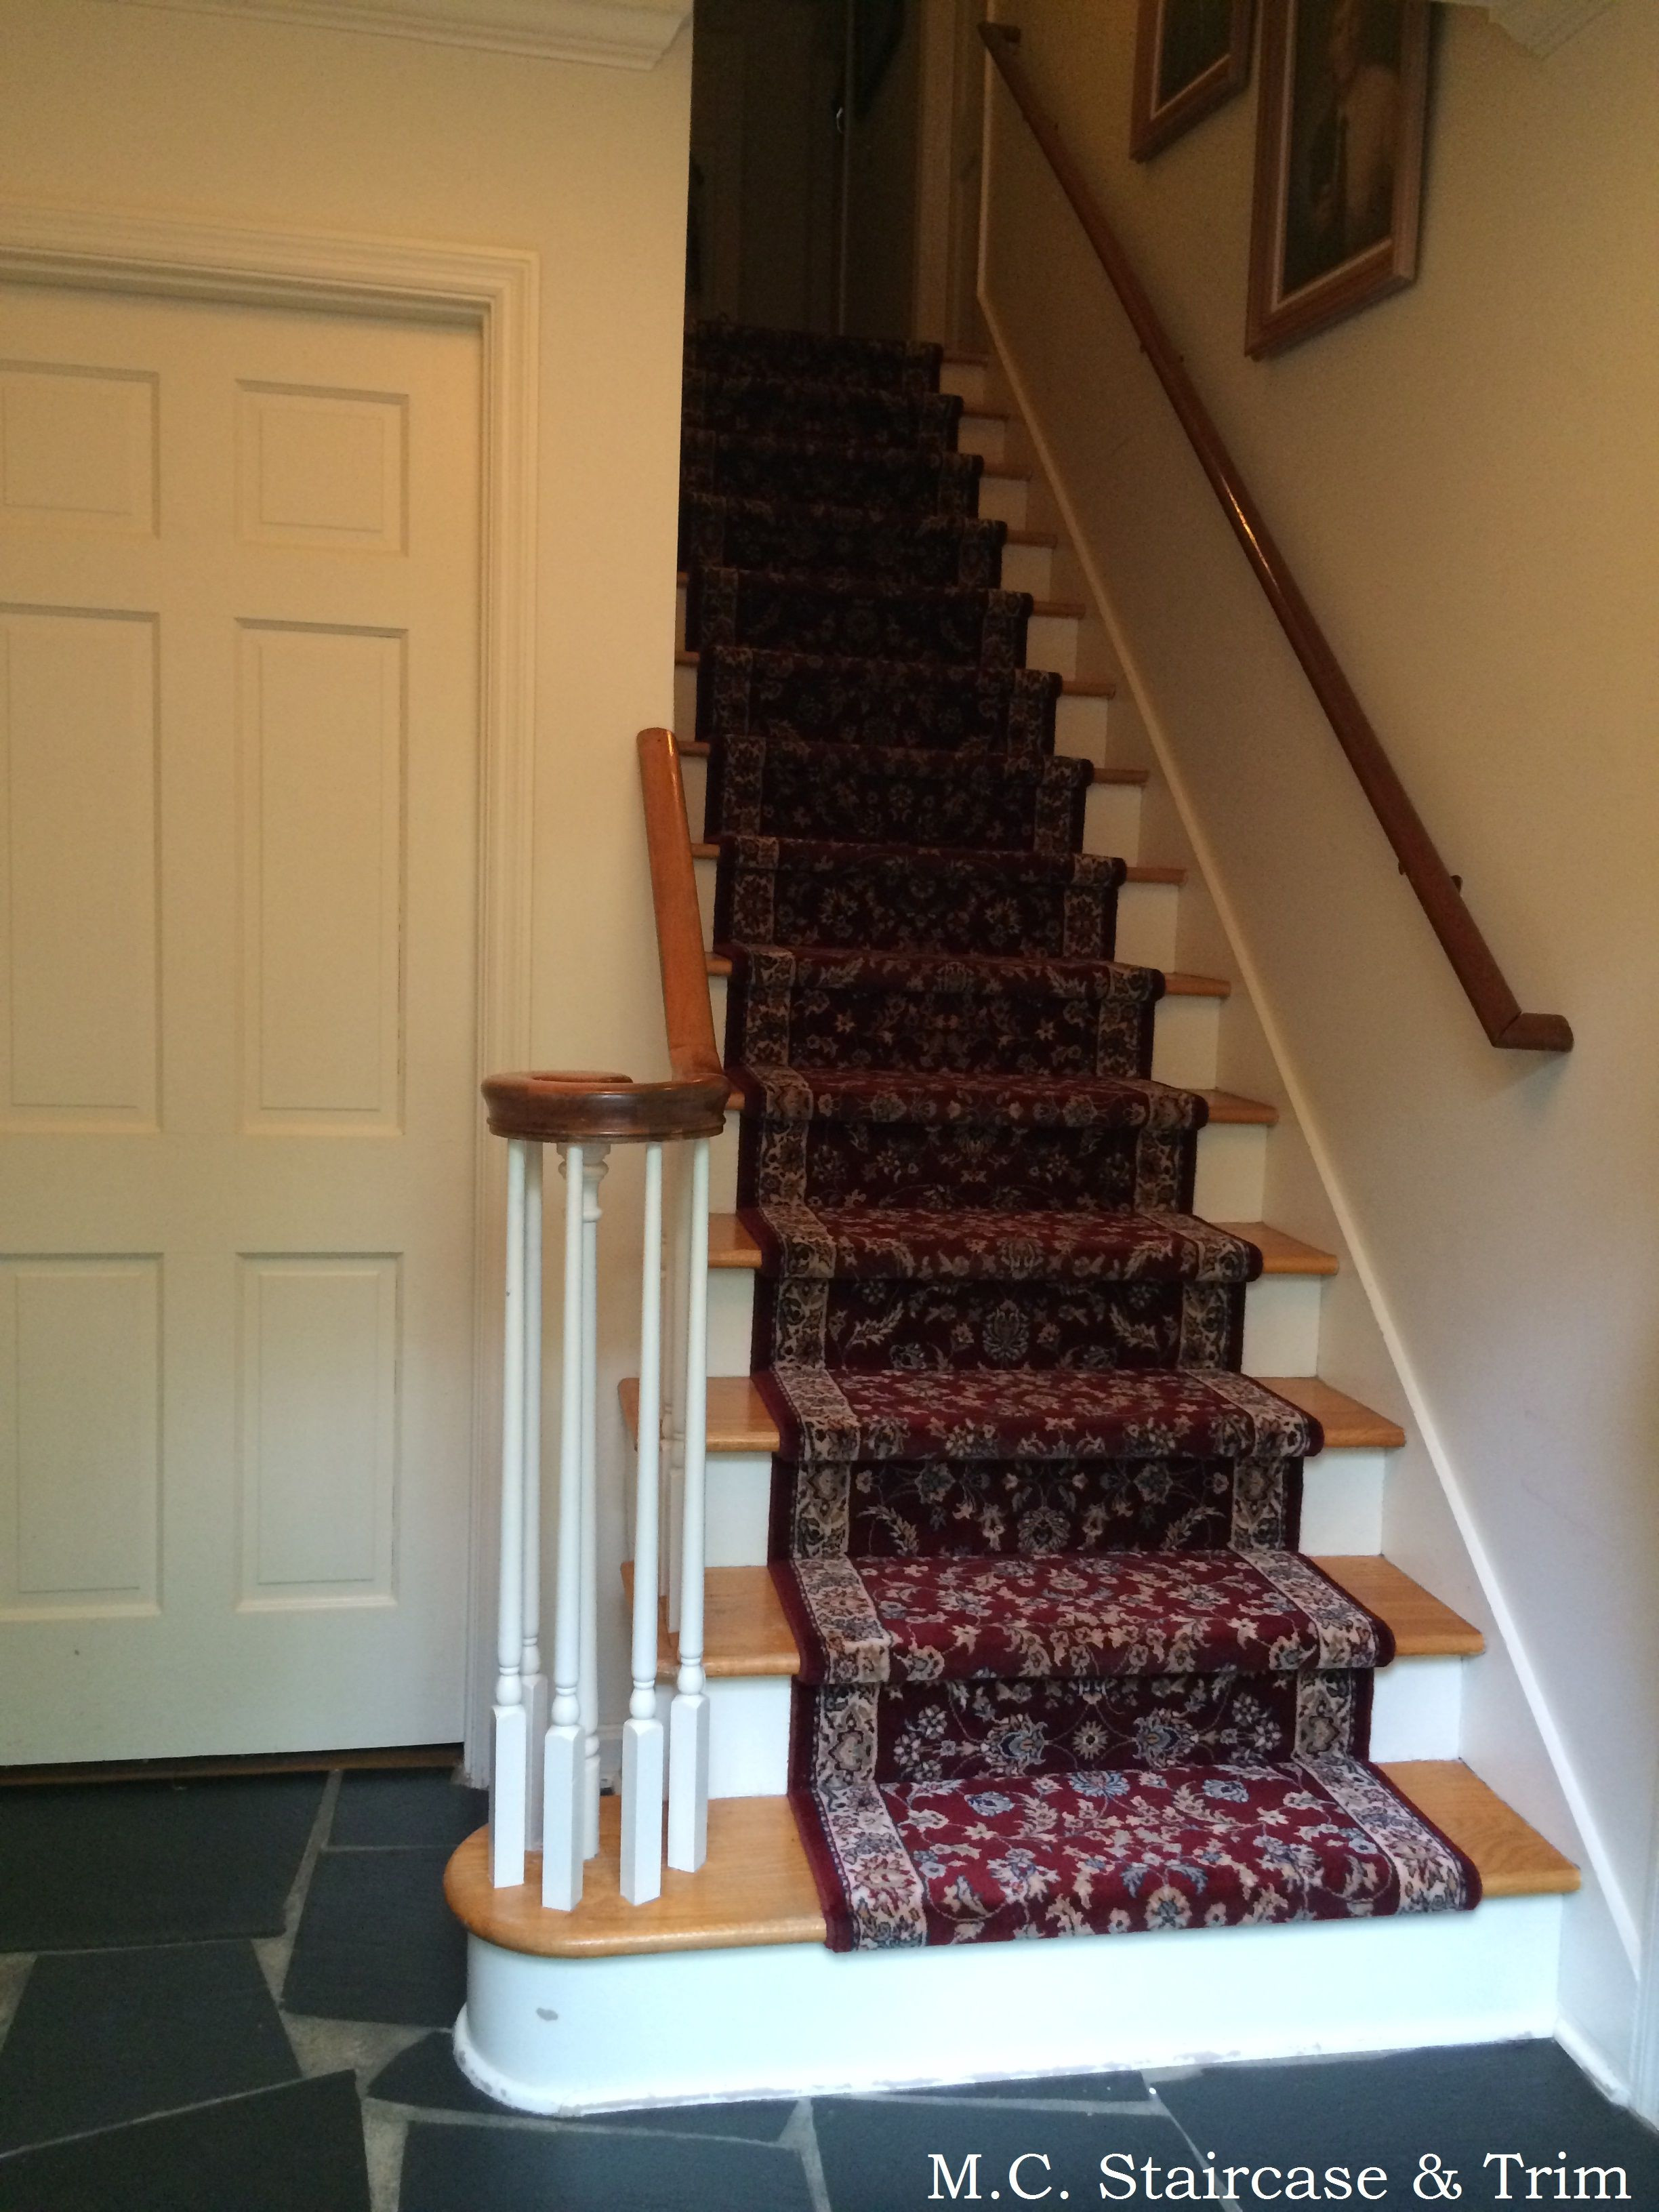 hardwood floor refinishing mercer county nj of newel post upgrade by m c staircase trim replacement of volute regarding newel post upgrade by m c staircase trim replacement of volute newel with a traditional box newel also the replacement of all handrail